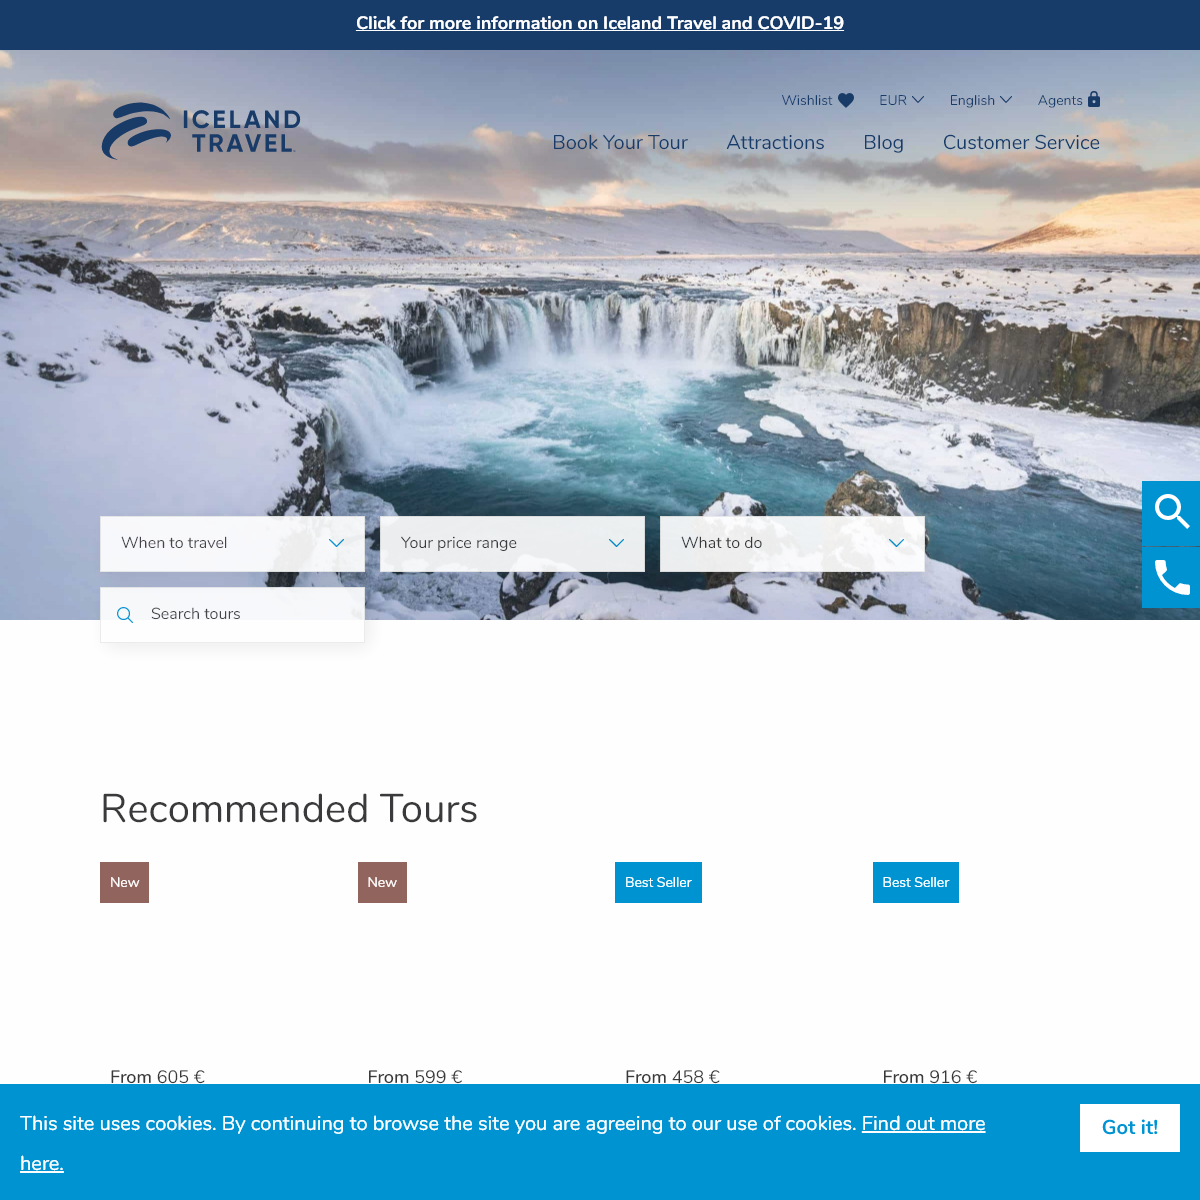 Iceland Travel - Iceland Tourism Packages - Book Iceland Tours Online